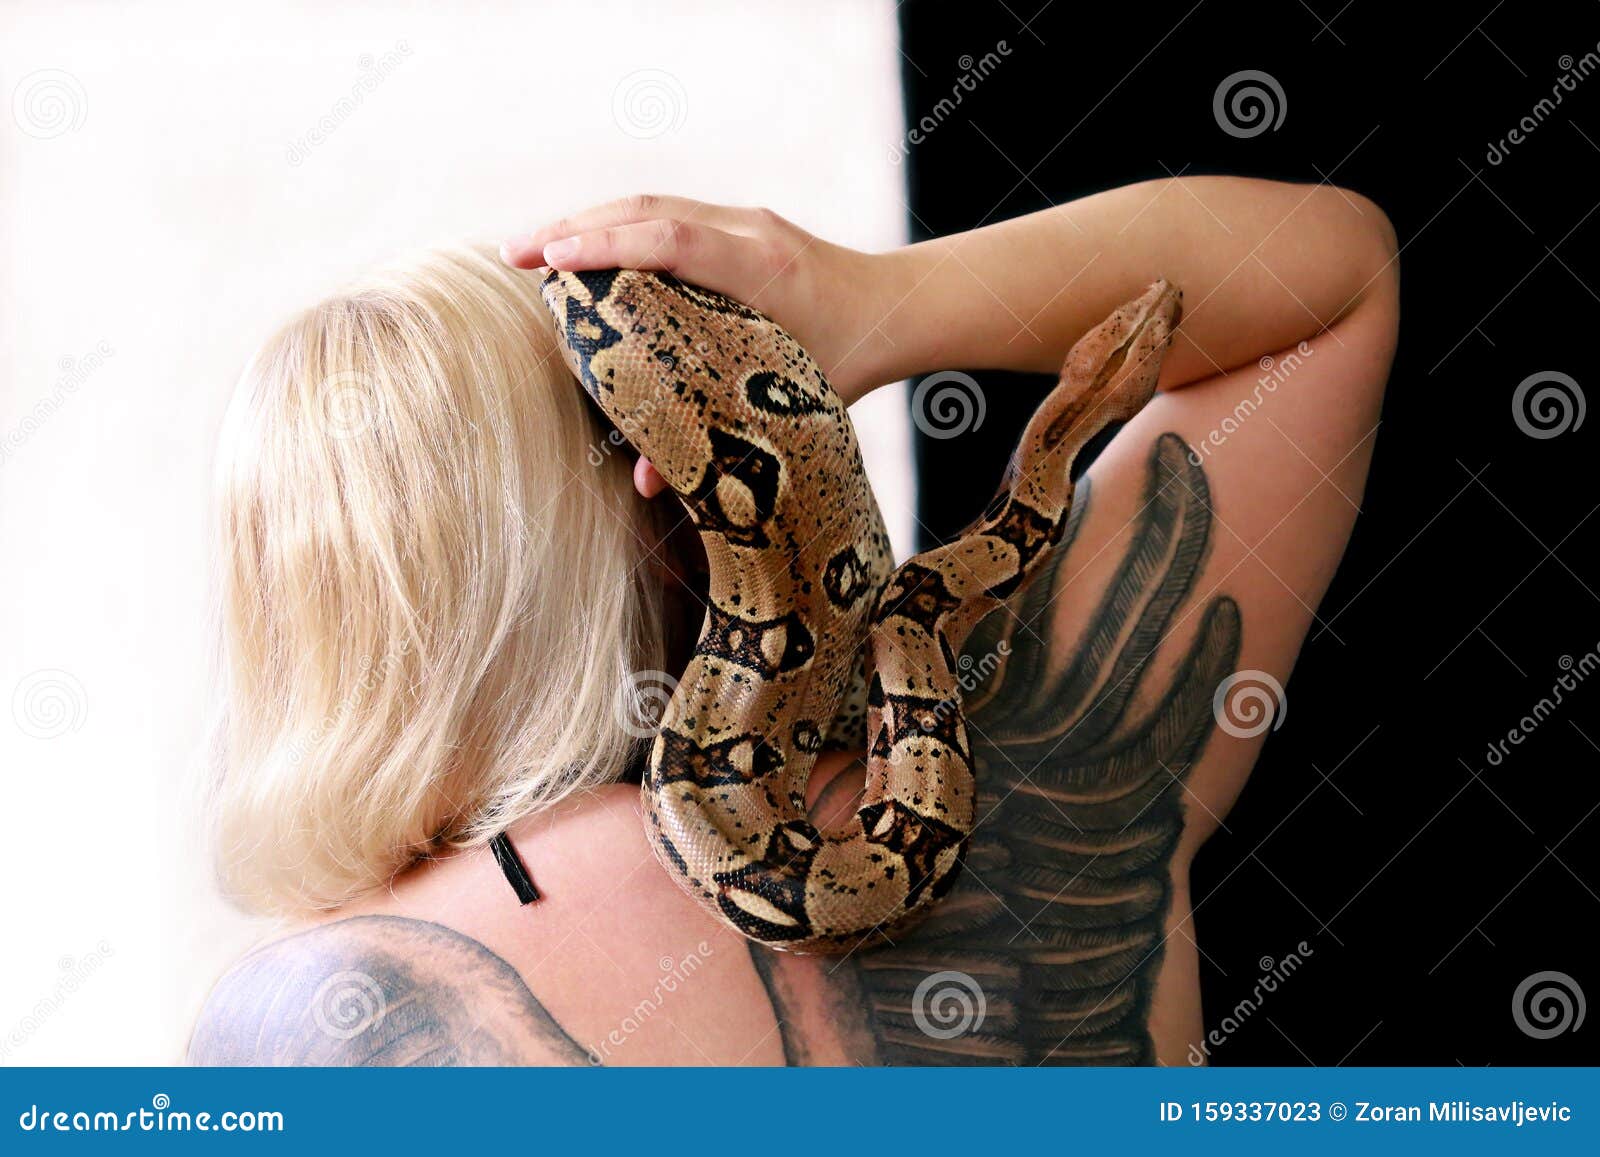 naked girls and snakes